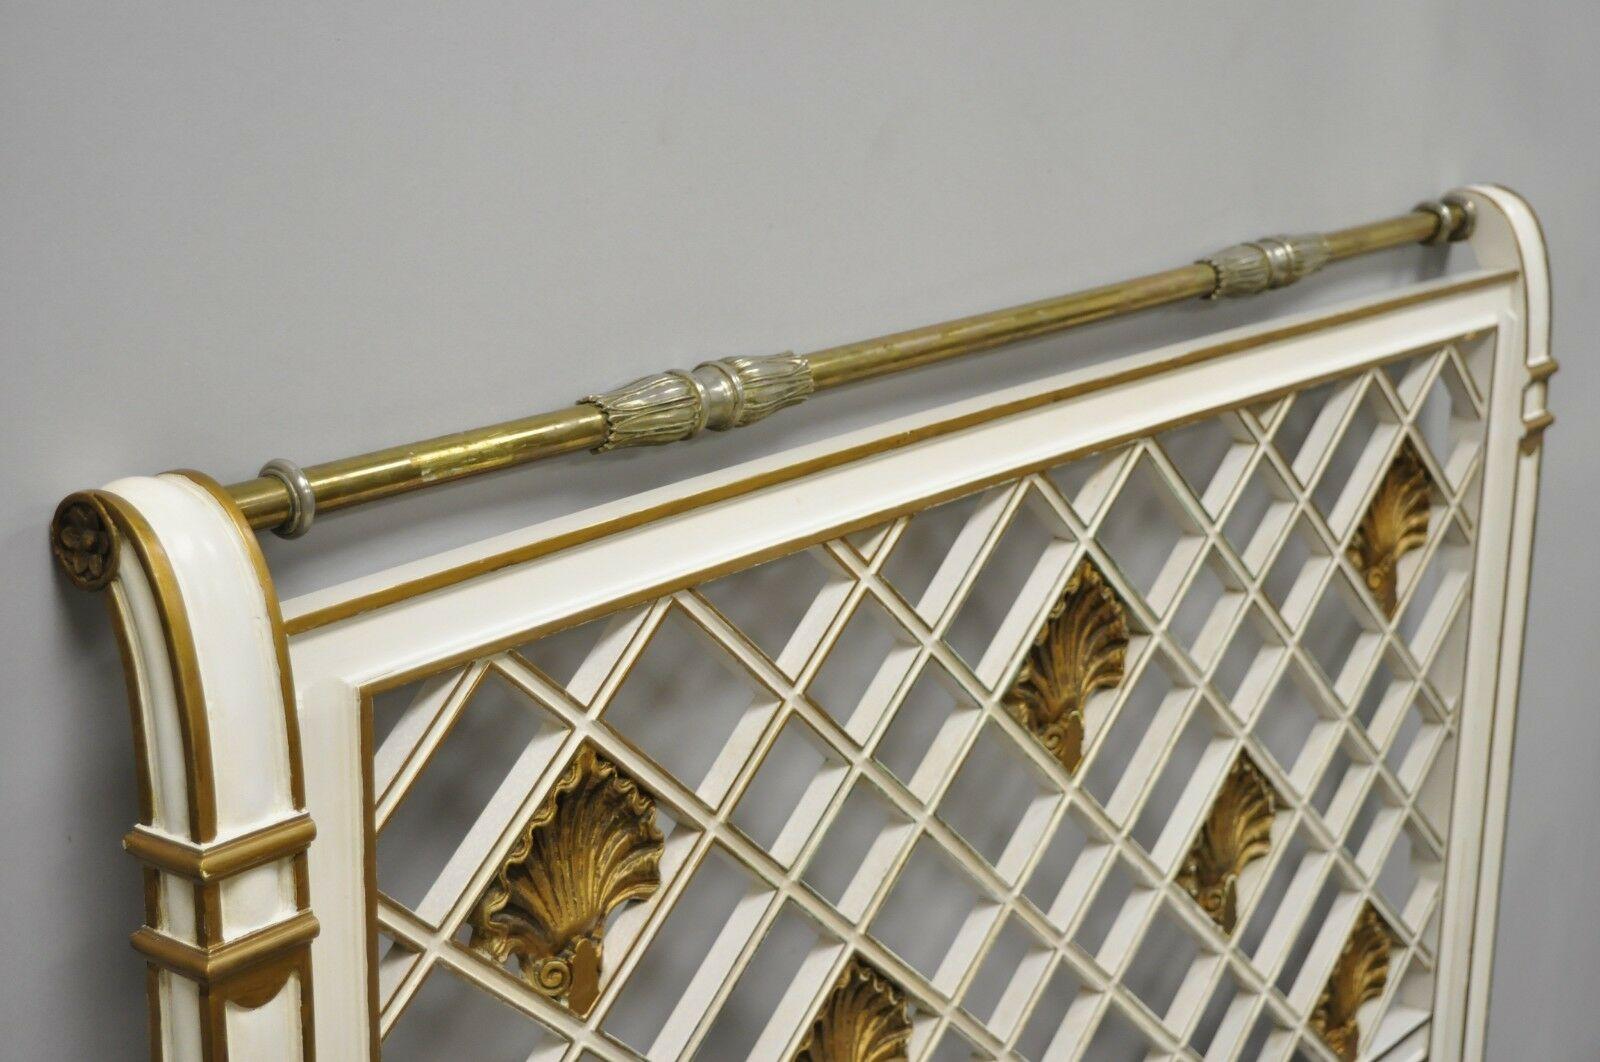 Vintage French neoclassical style Italian shell carve lattice queen size bed headboard. Item features carved wood shells, brass rail, lattice design, white and gold painted finish, great style and form, circa 1950. Measurements: 49.5